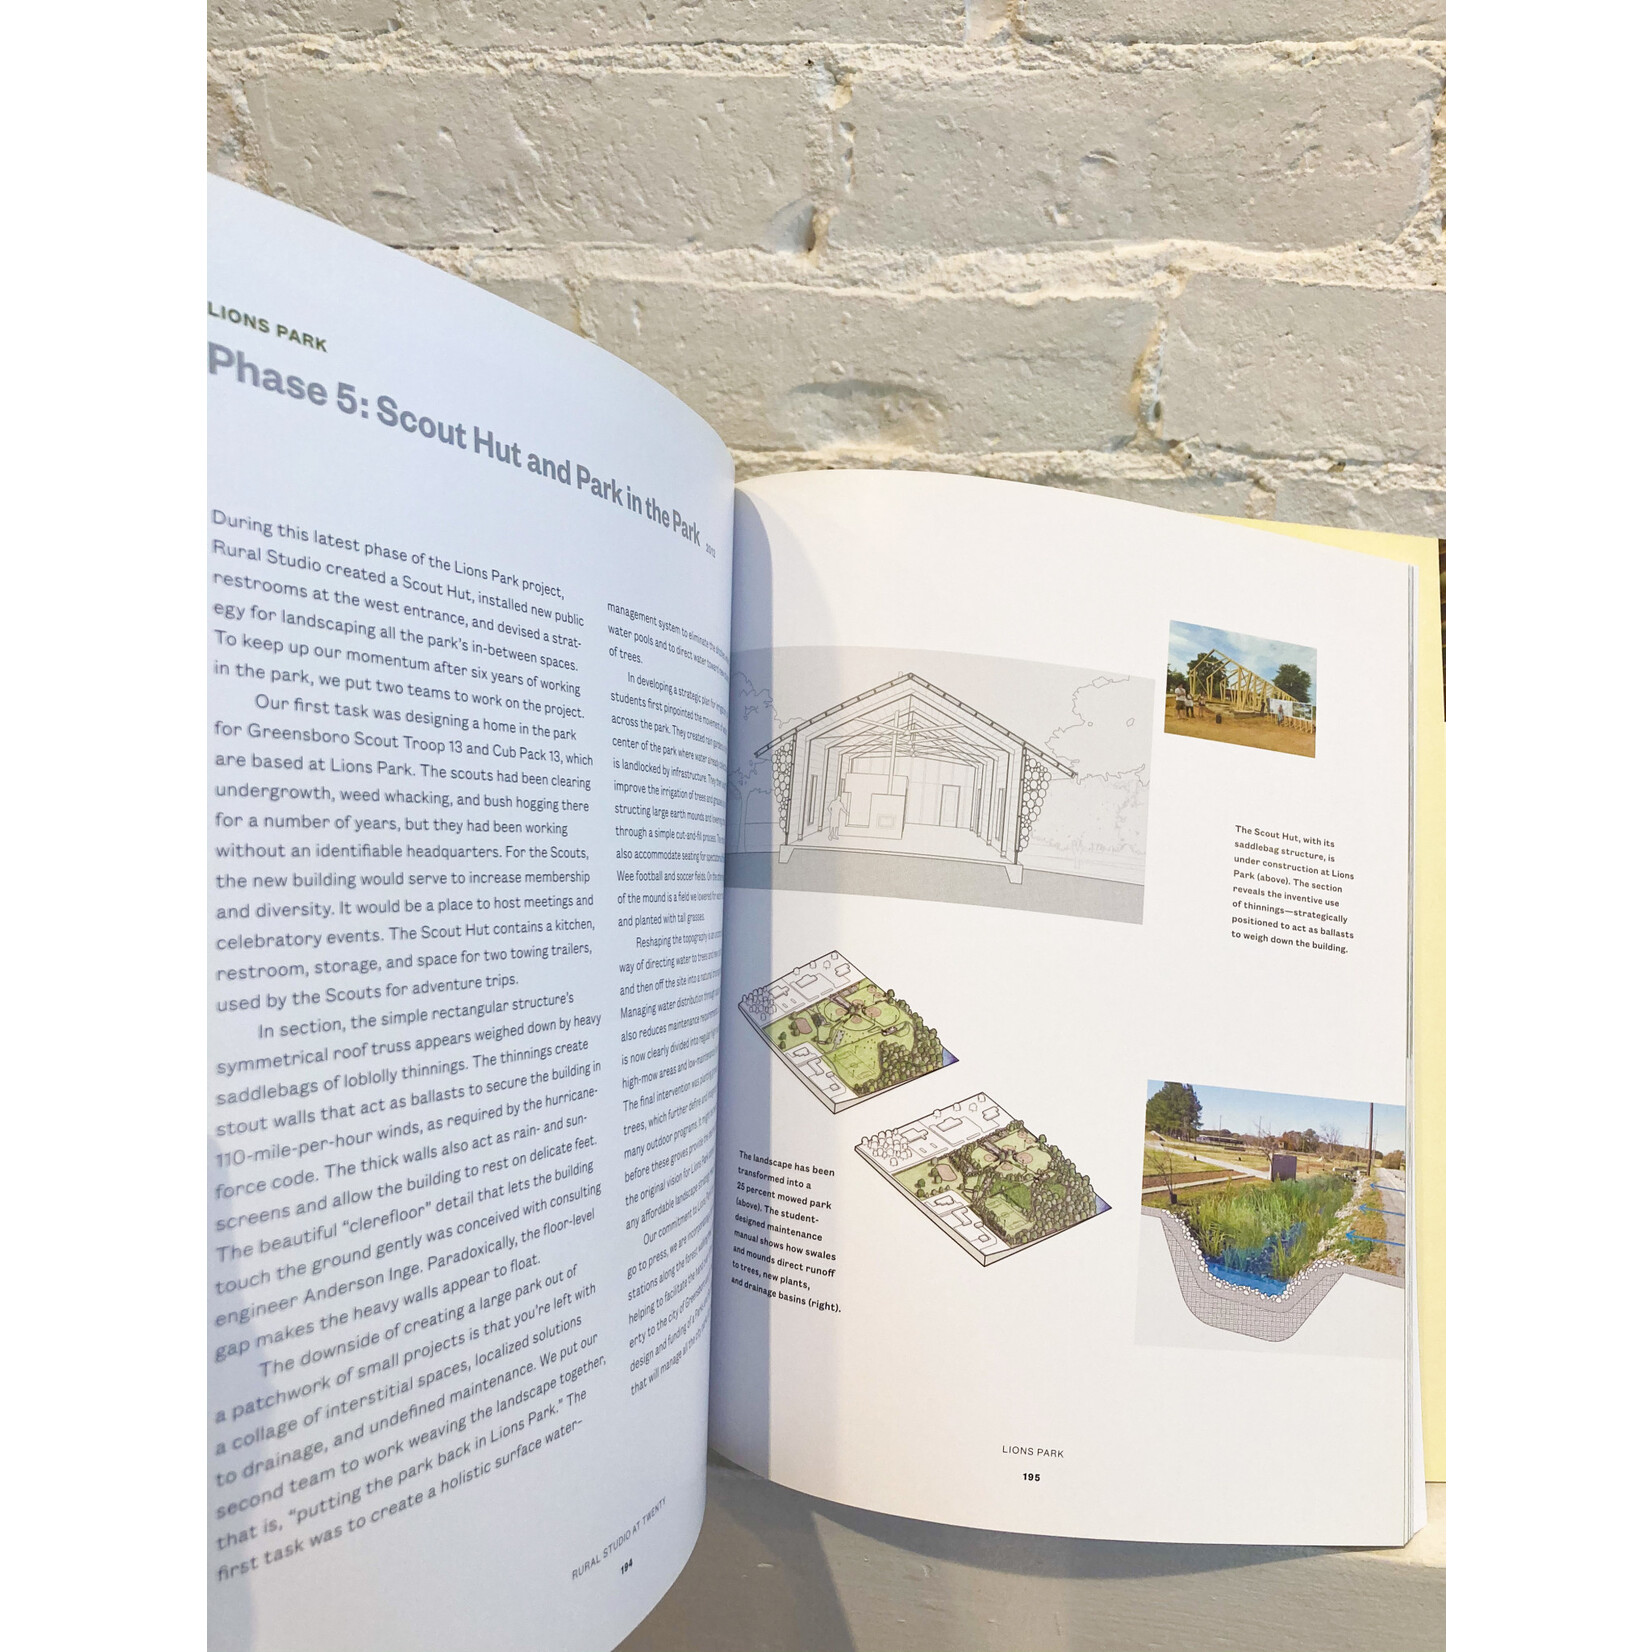 Rural Studio at Twenty: Designing and Building in Hale County, Alabama by Andrew Freear, Elena Barthel and Andrea Oppenheimer Dean